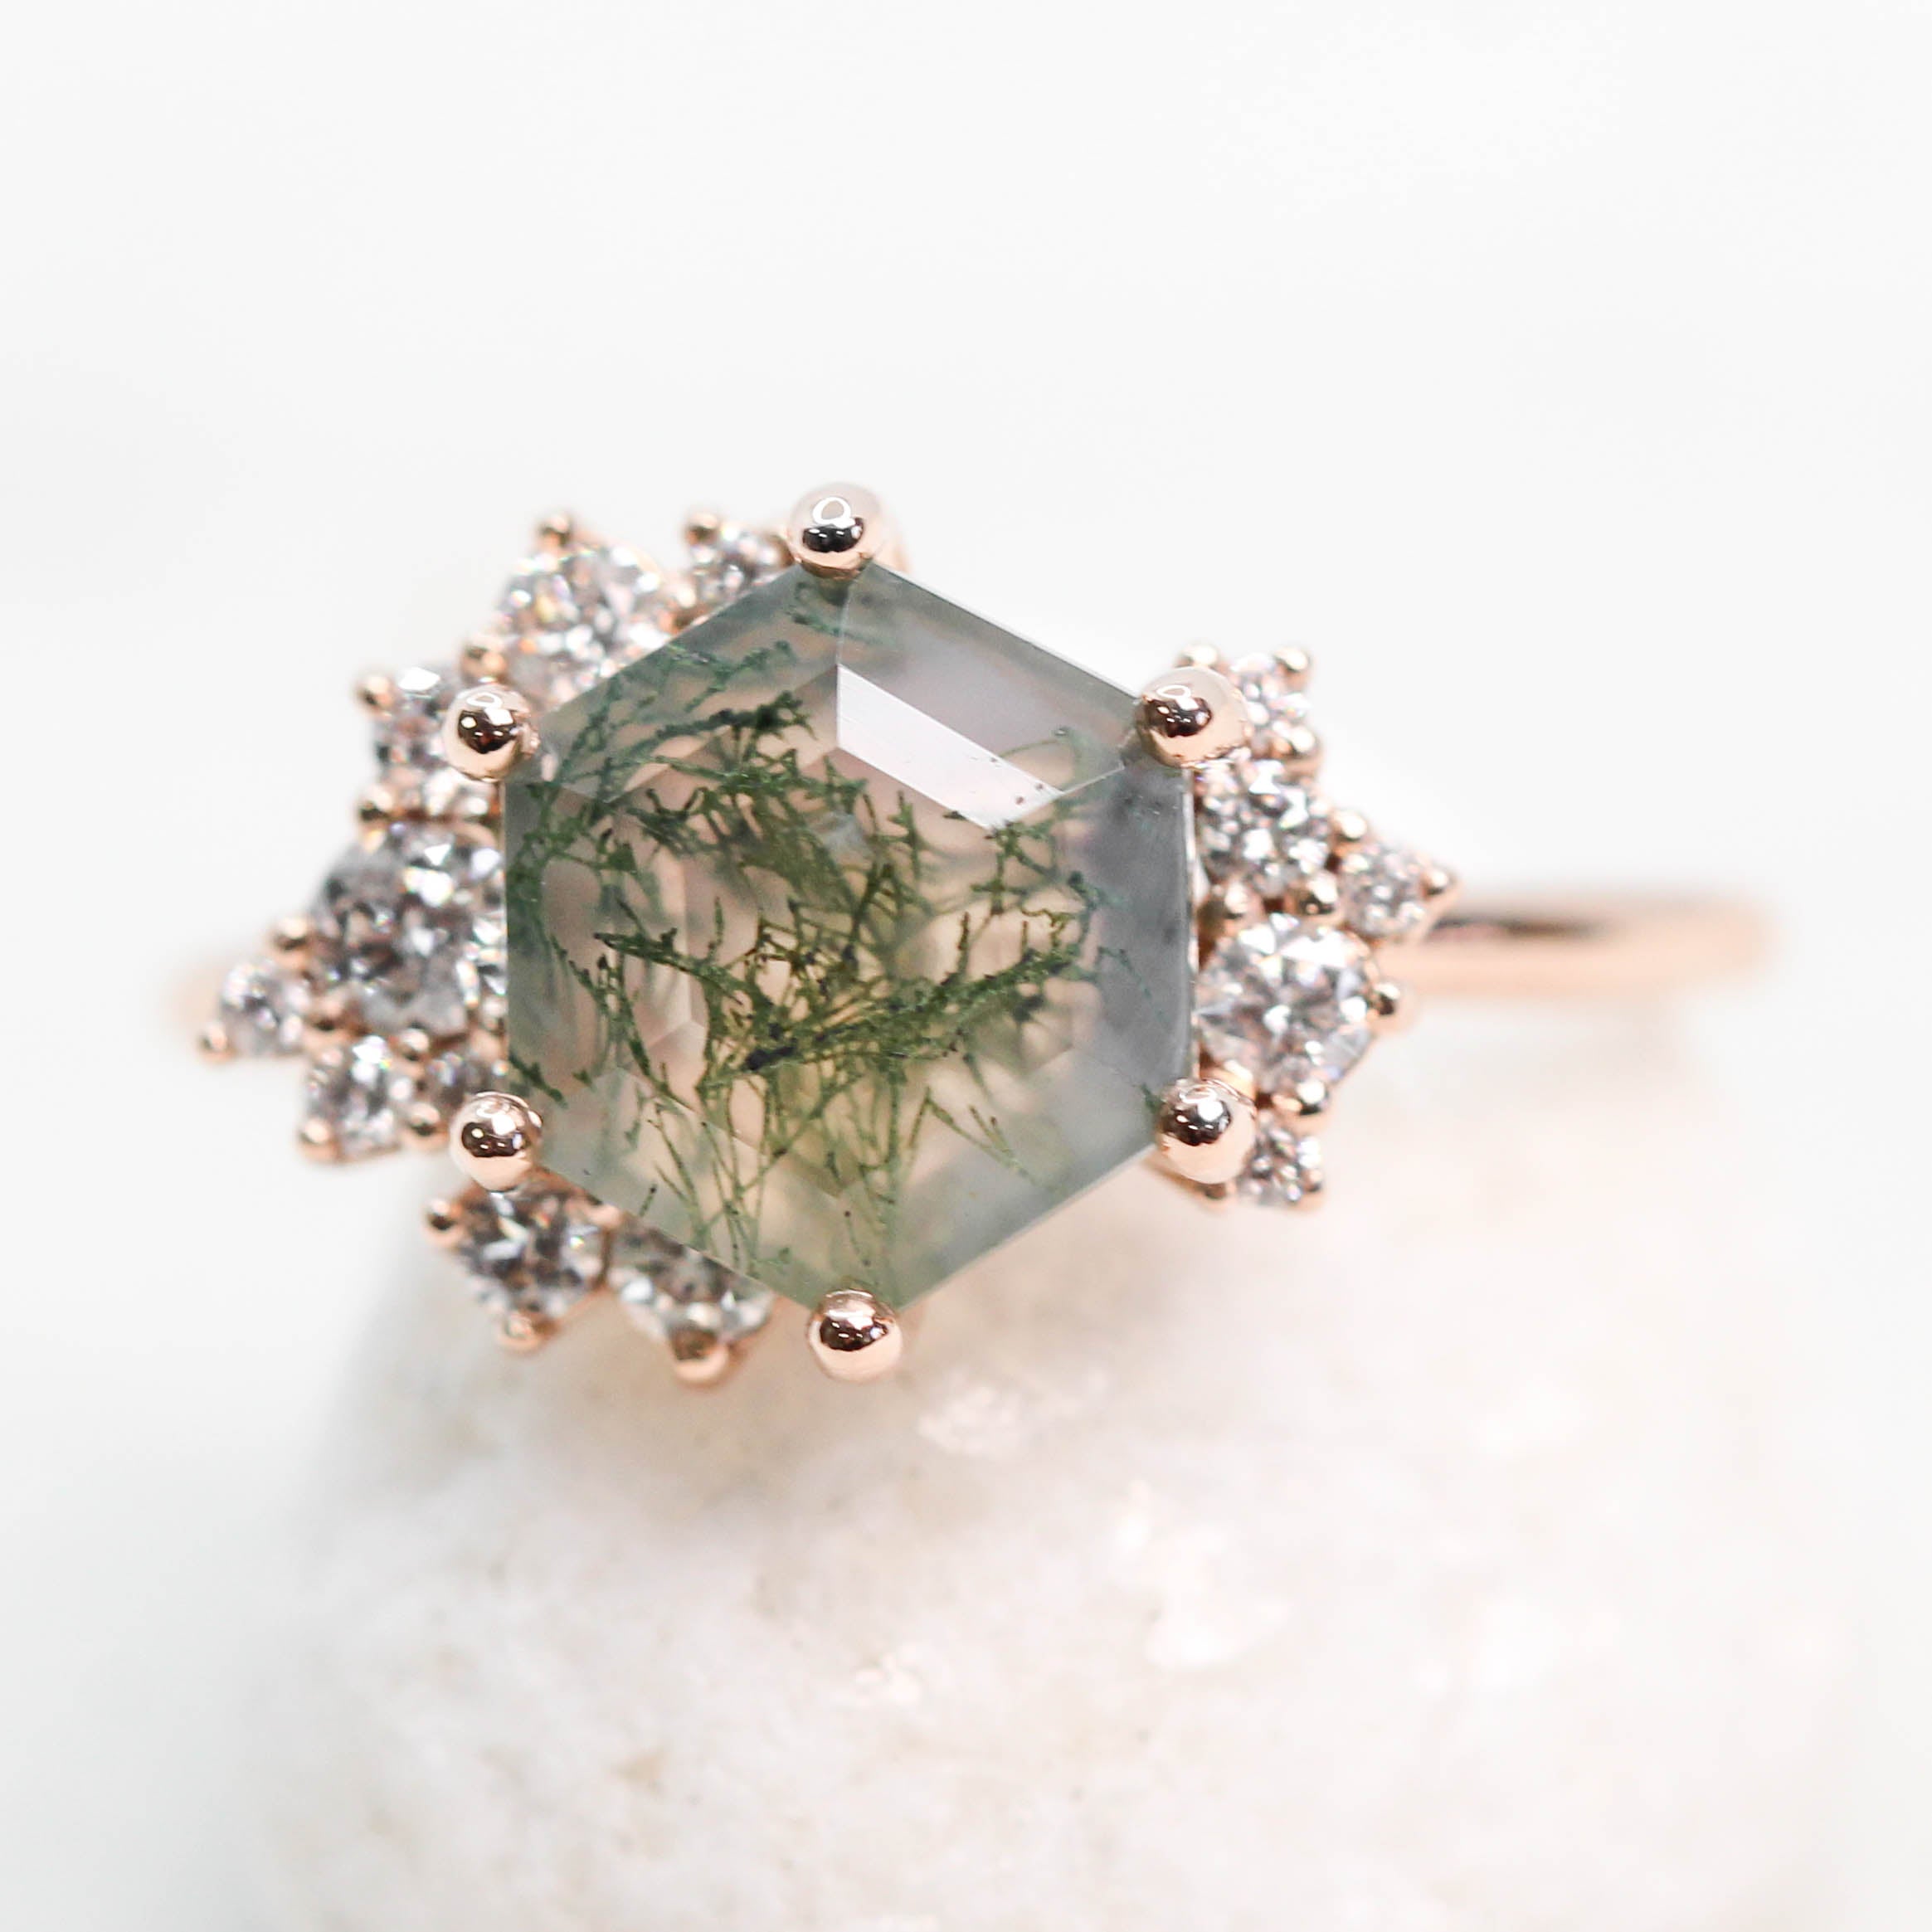 Custom Orion with 2 Carat Hexagon Moss Agate and White Accent Diamonds in your Choice of 14K Gold or Platinum - Made to Order - Each Stone is Unique - Midwinter Co. Alternative Bridal Rings and Modern Fine Jewelry